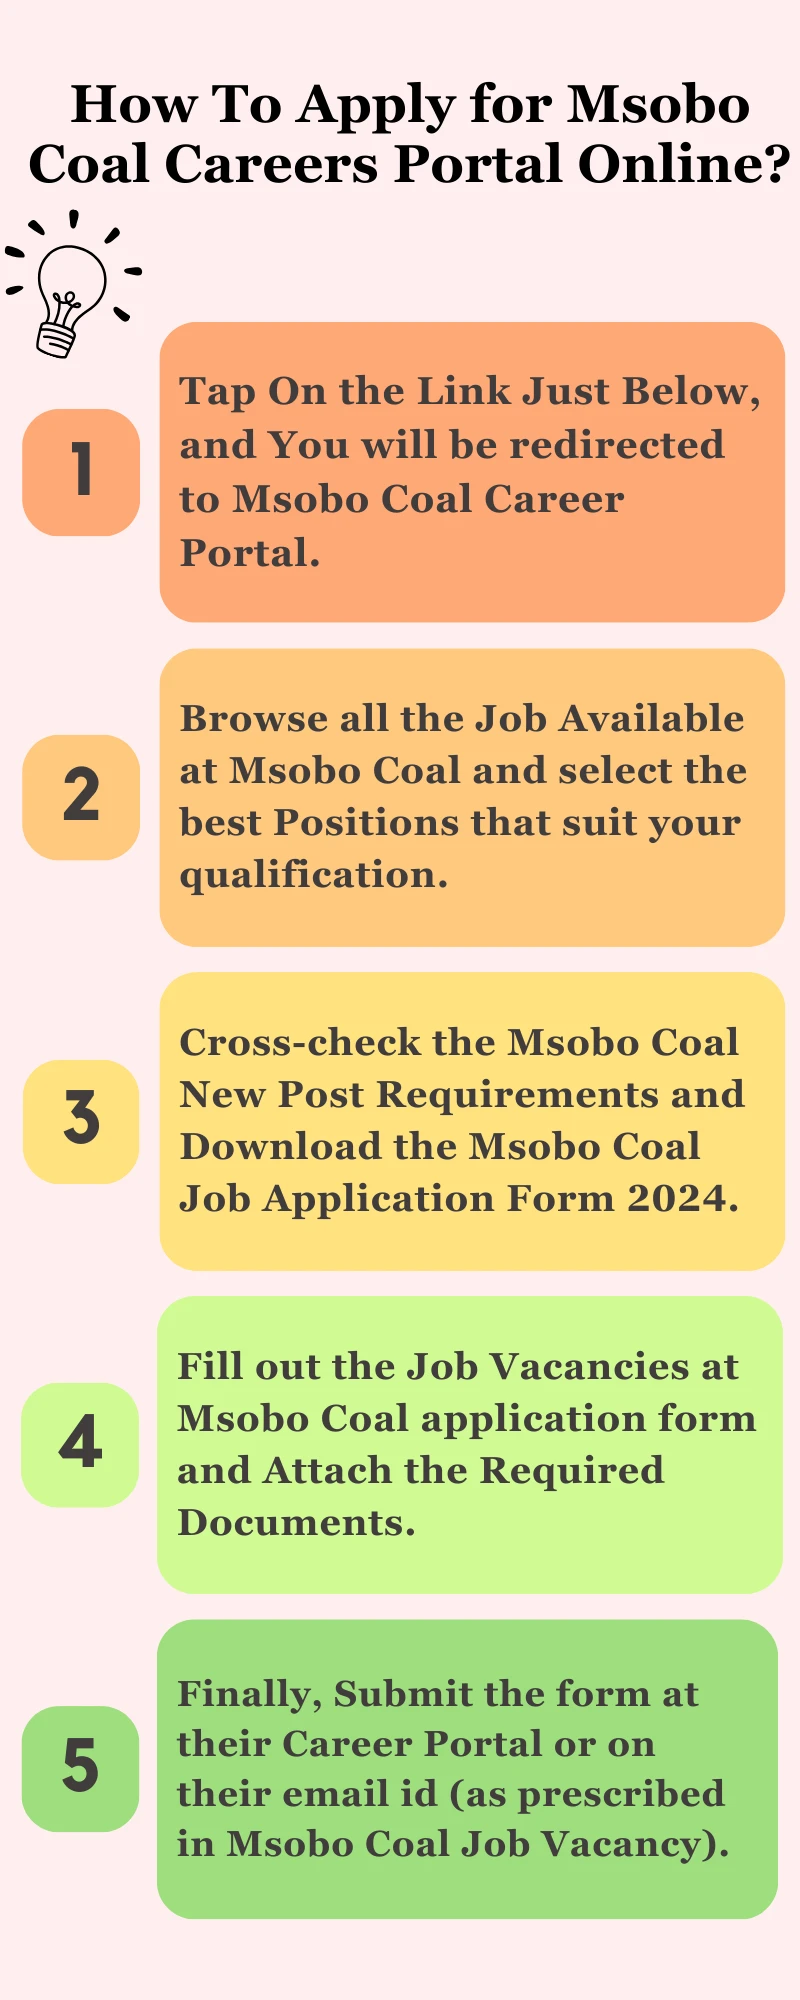 How To Apply for Msobo Coal Careers Portal Online?